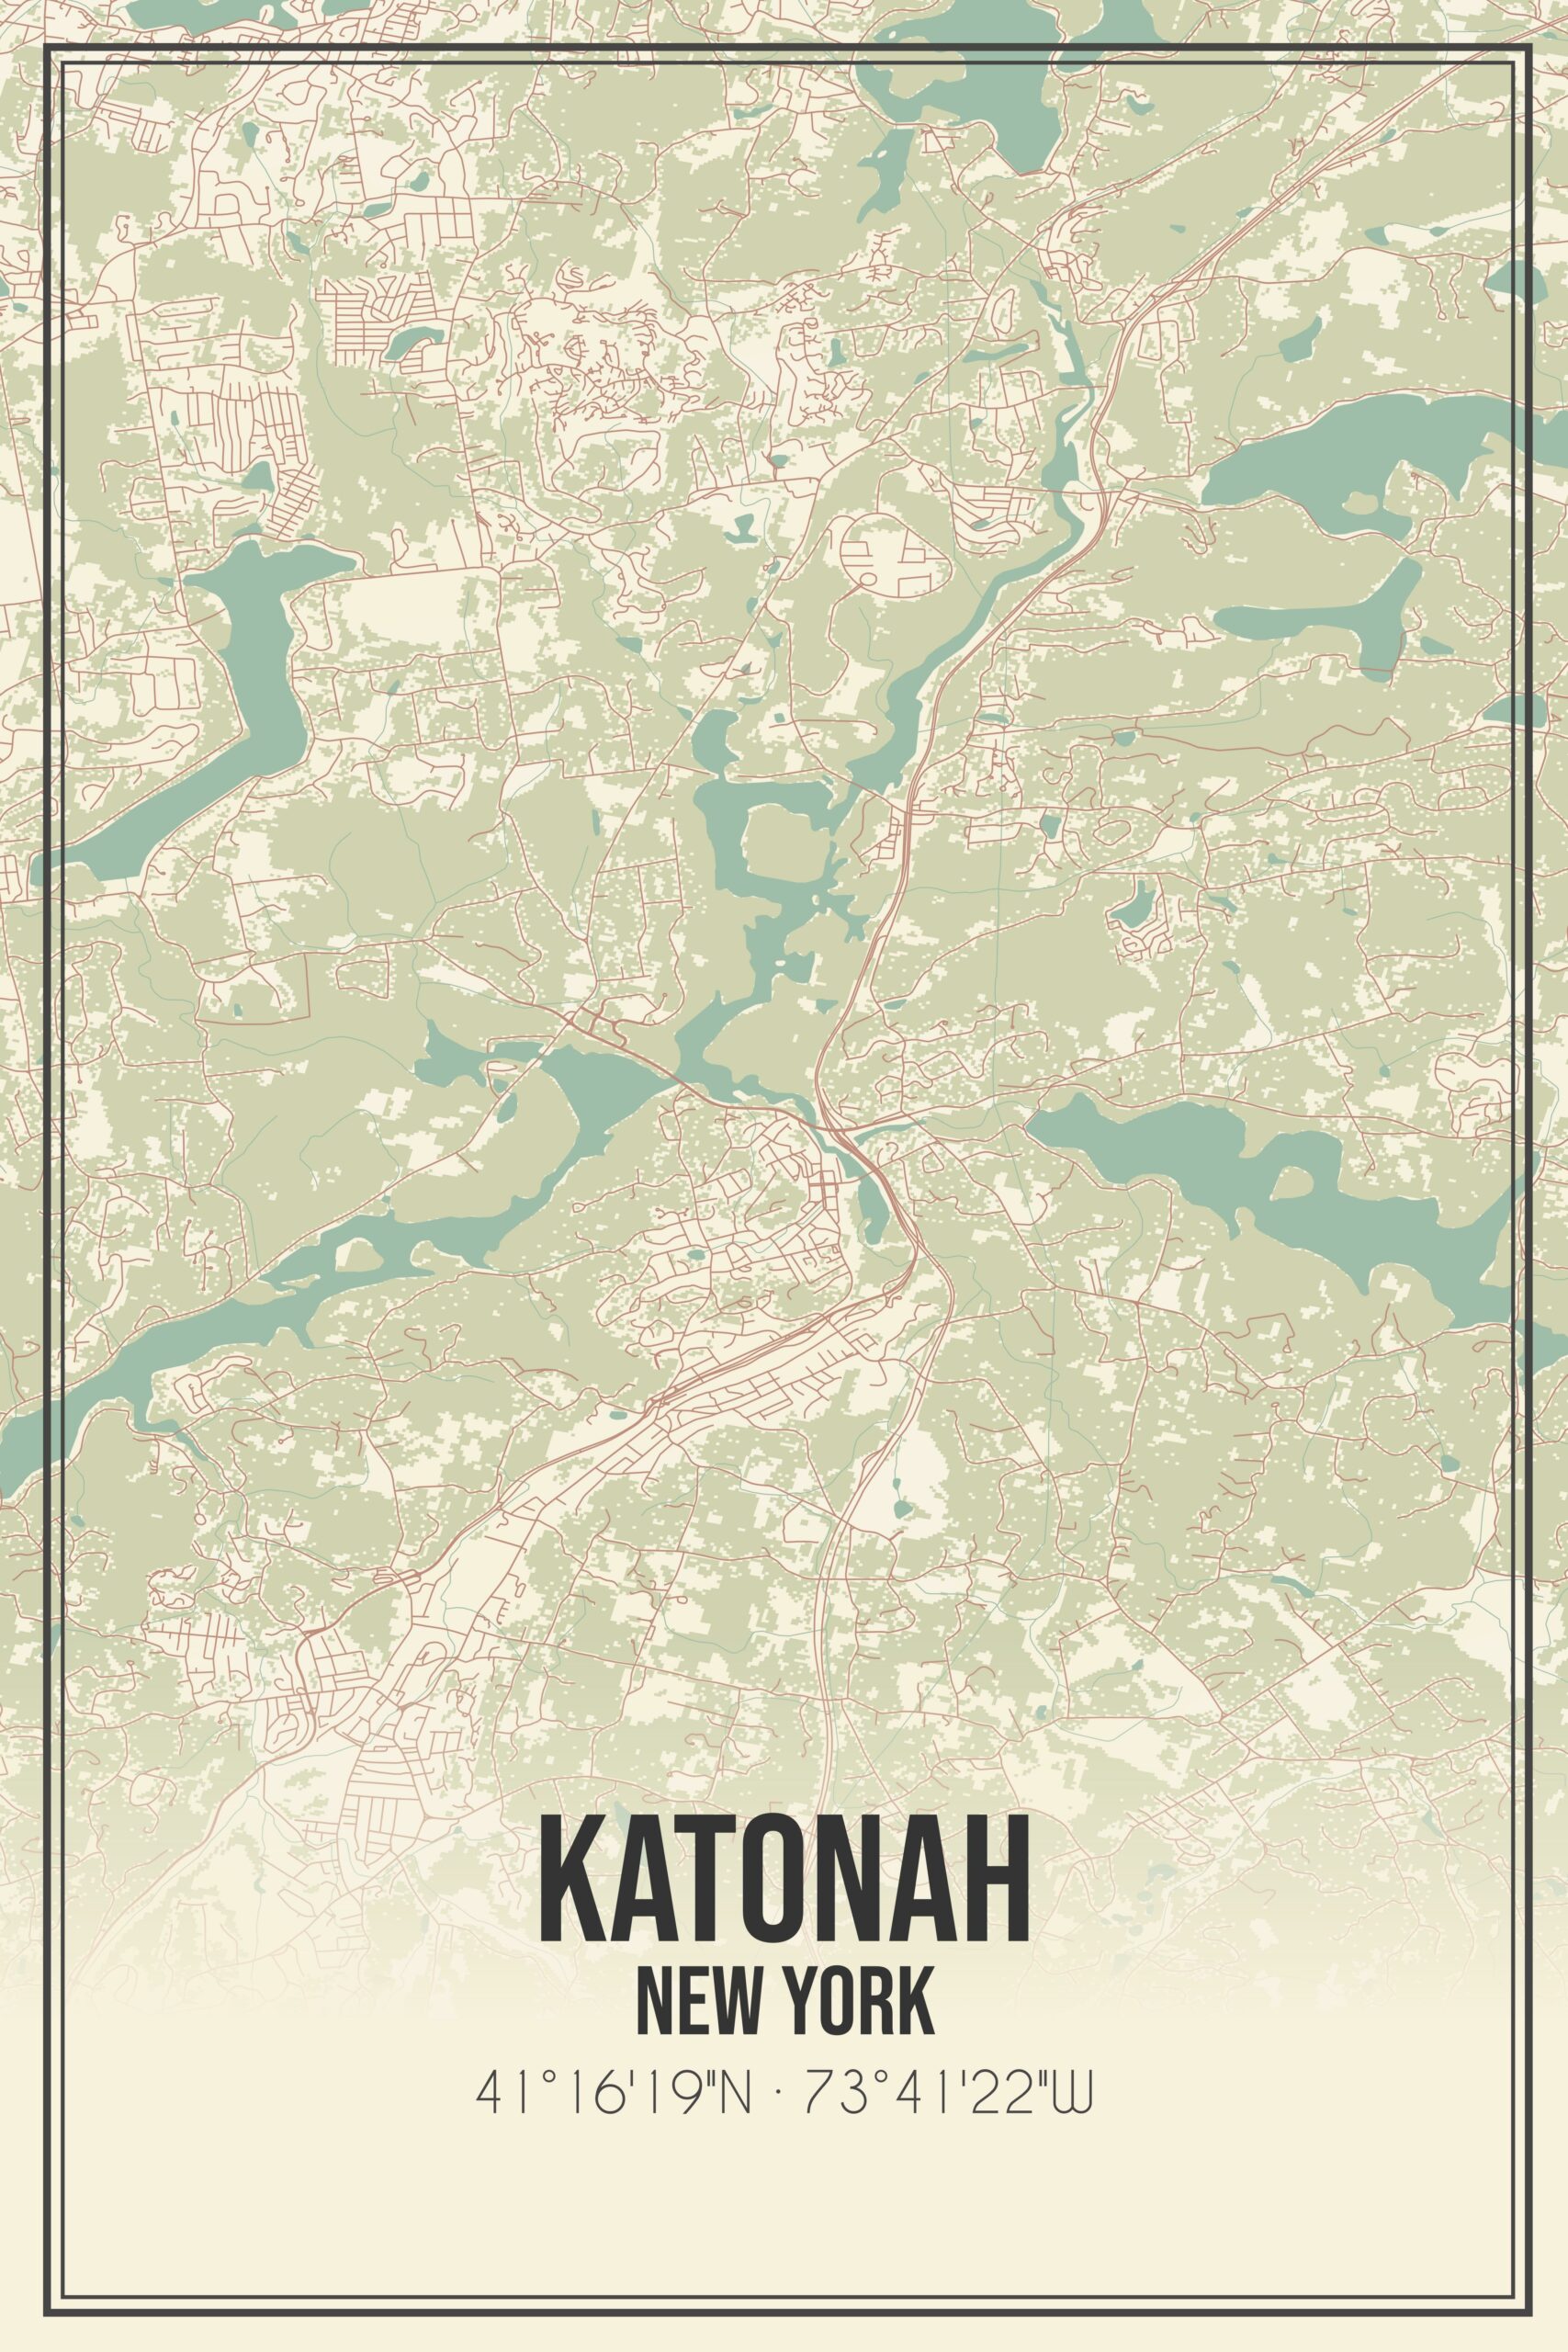 Stylized vintage map of Katonah, New York, with geographic coordinates.